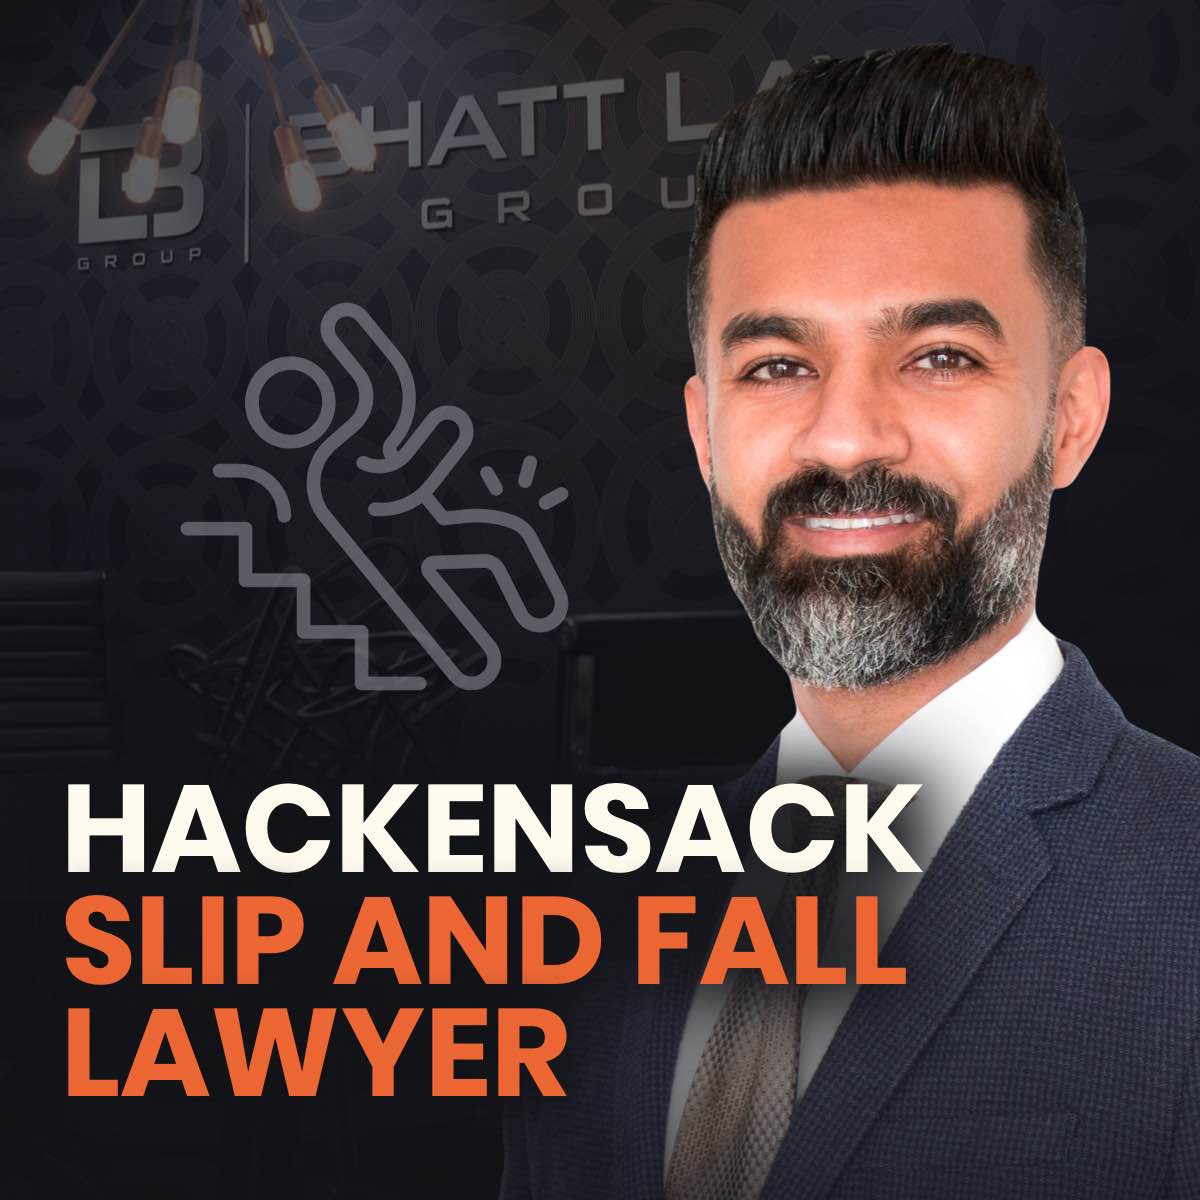 Hackensack Slip and Fall Lawyer